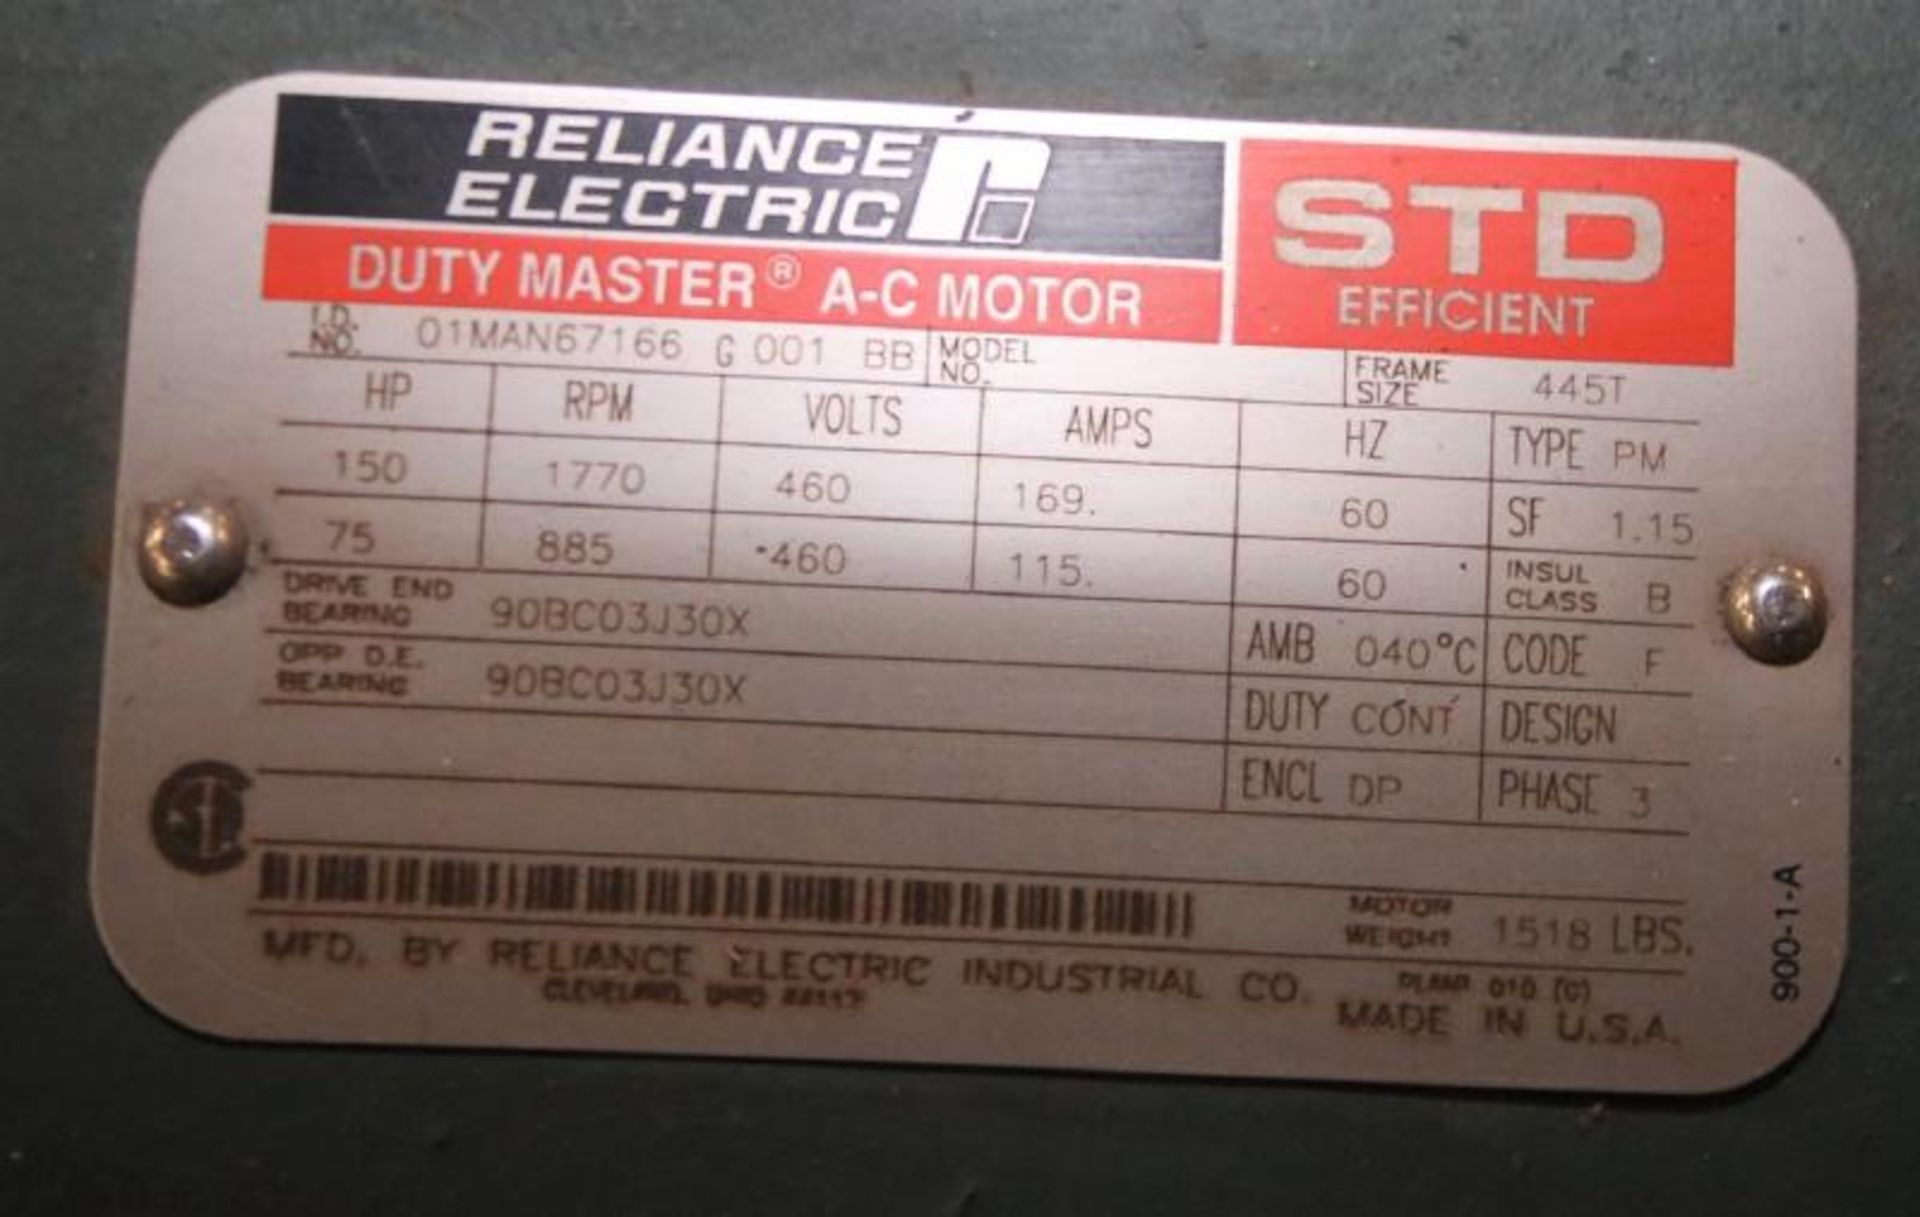 Reliance 150 / 75 hp Motor, with 1170 / 885 rpm, Frame Size 445T, 460V 3 Phase (Located - Image 2 of 2